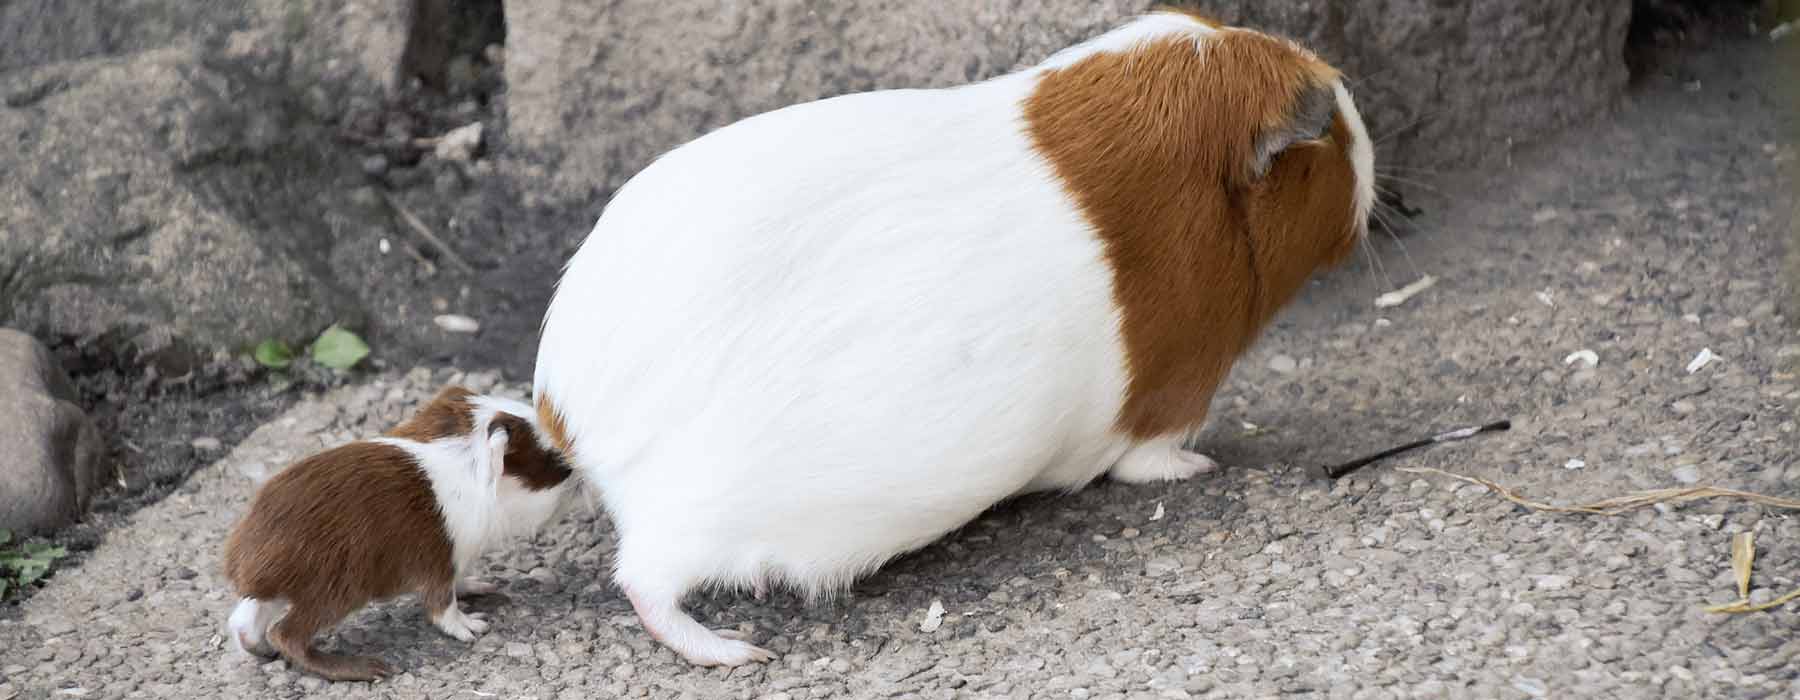 mother guinea pig being followed by a baby guinea pig